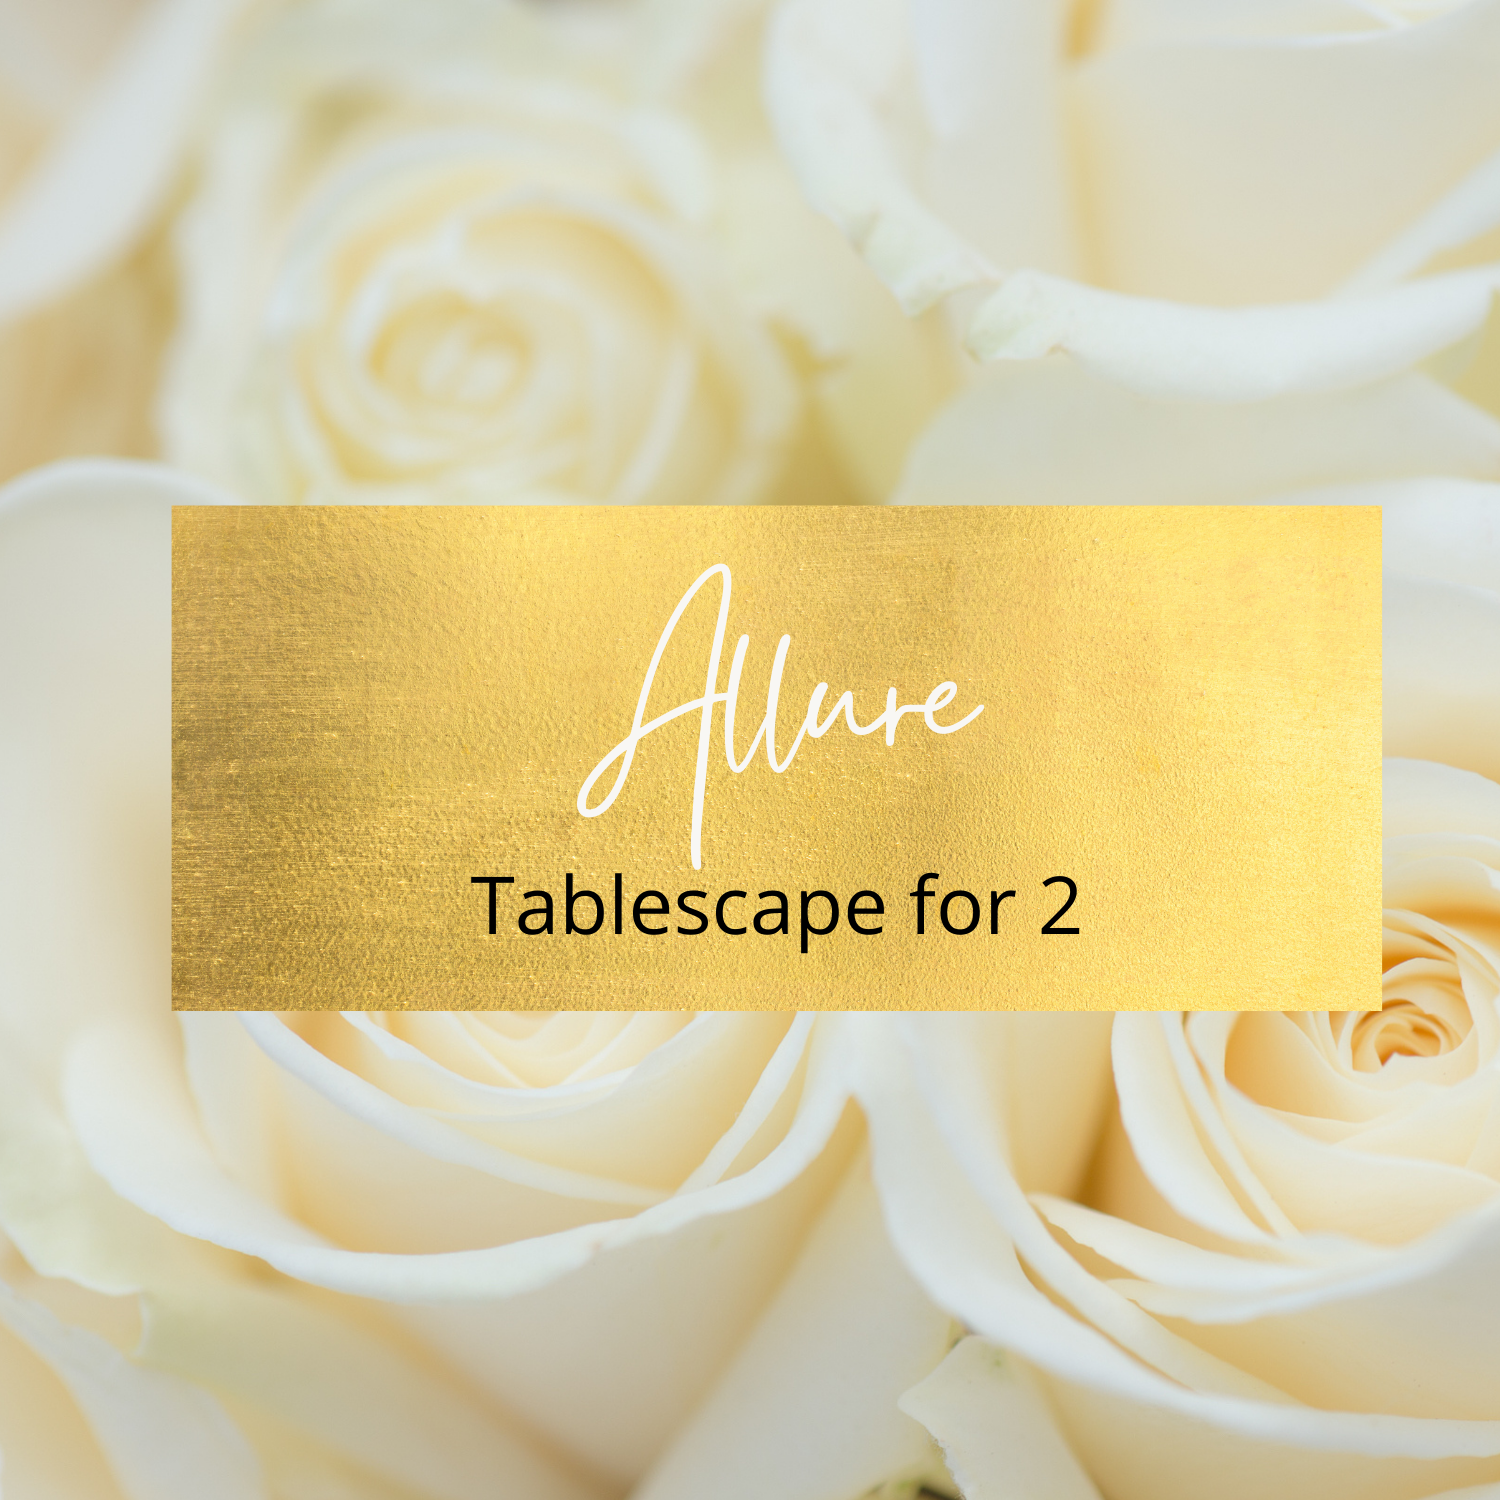 Allure Dinner Set for 2 Romantic Gift Dinner Set Love Decorations Special Night - Tablescape for 2